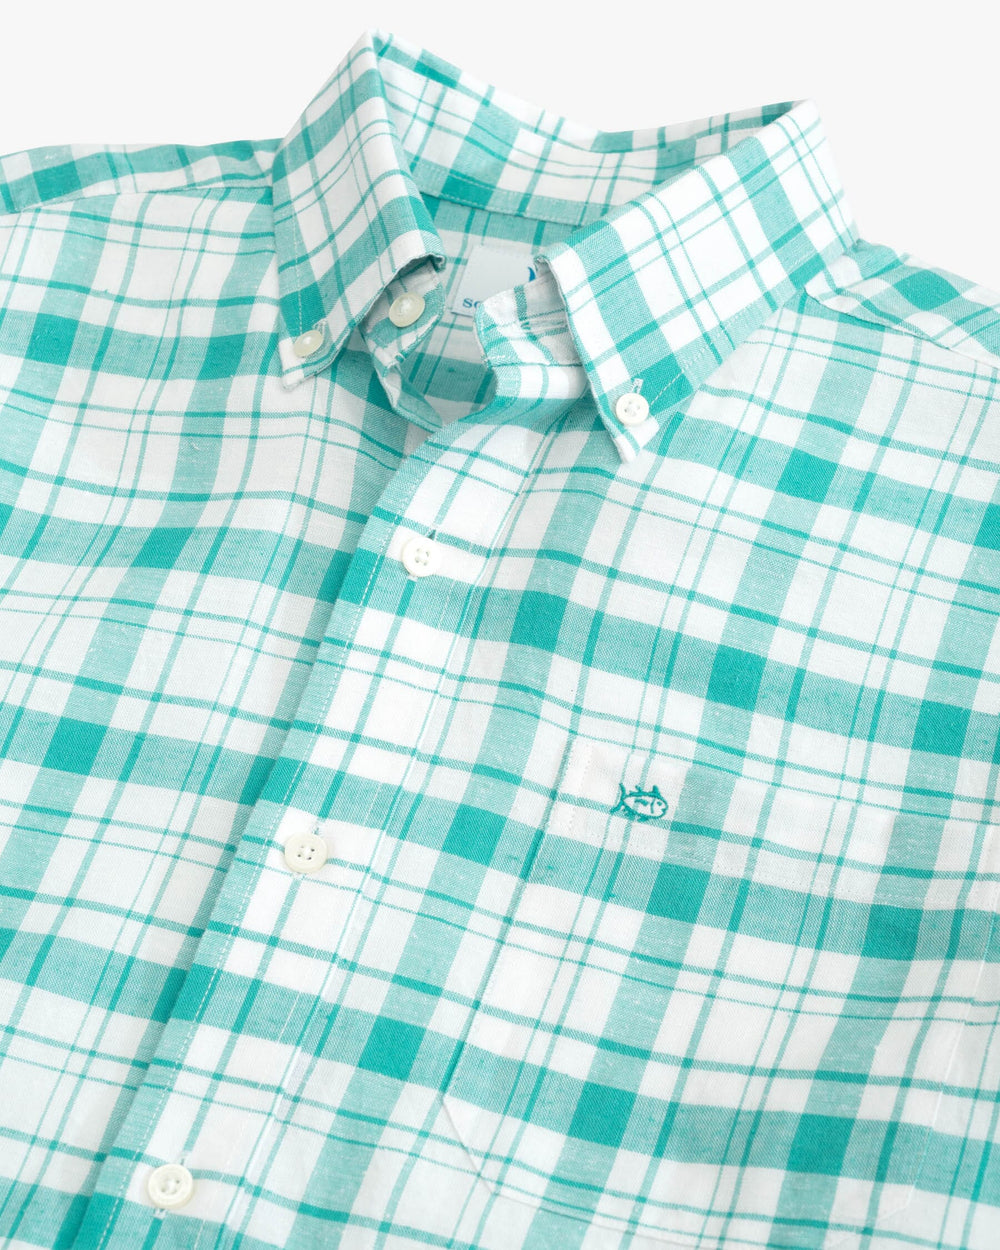 The detail view of the Southern Tide Headland Moultire Plaid Long Sleeve Sport Shirt by Southern Tide - Tidal Wave